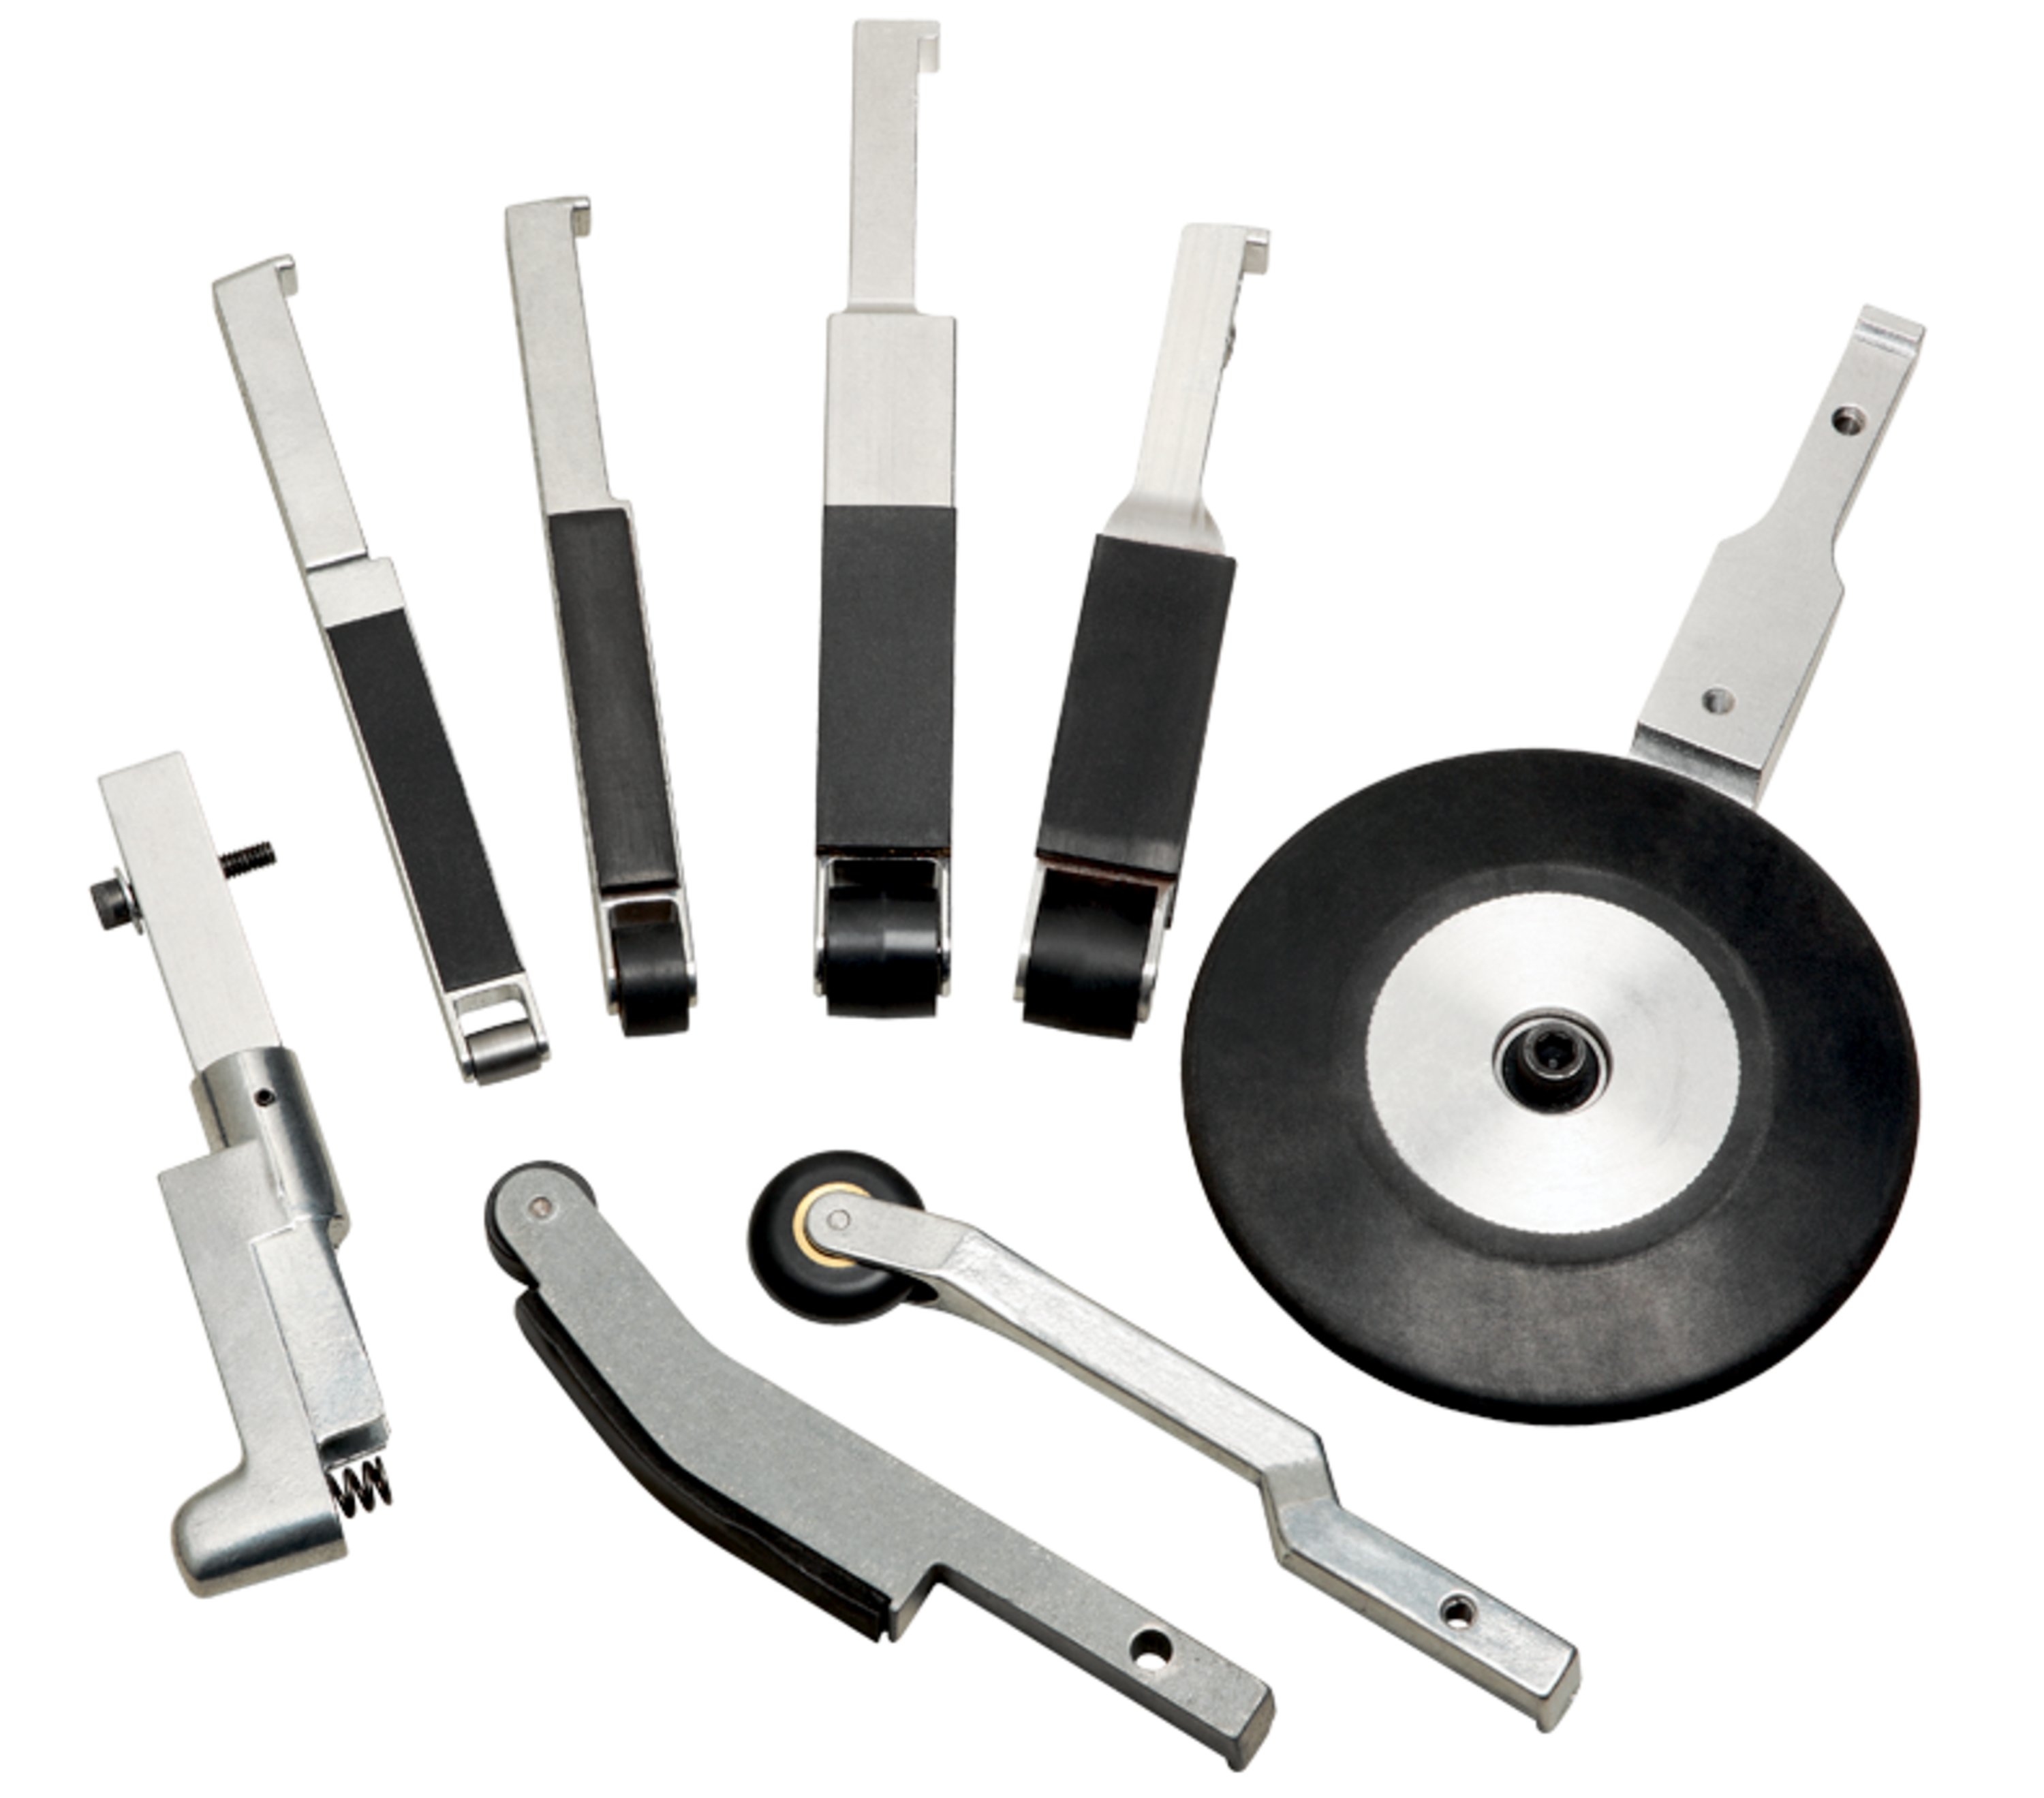 The 3M™ File Belt Arm Service Tool Kit is designed to help operators disassemble and reassemble attachment arms used on the 3M™ File Belt Sander (sold separately), primarily when contact wheel replacement is necessary.